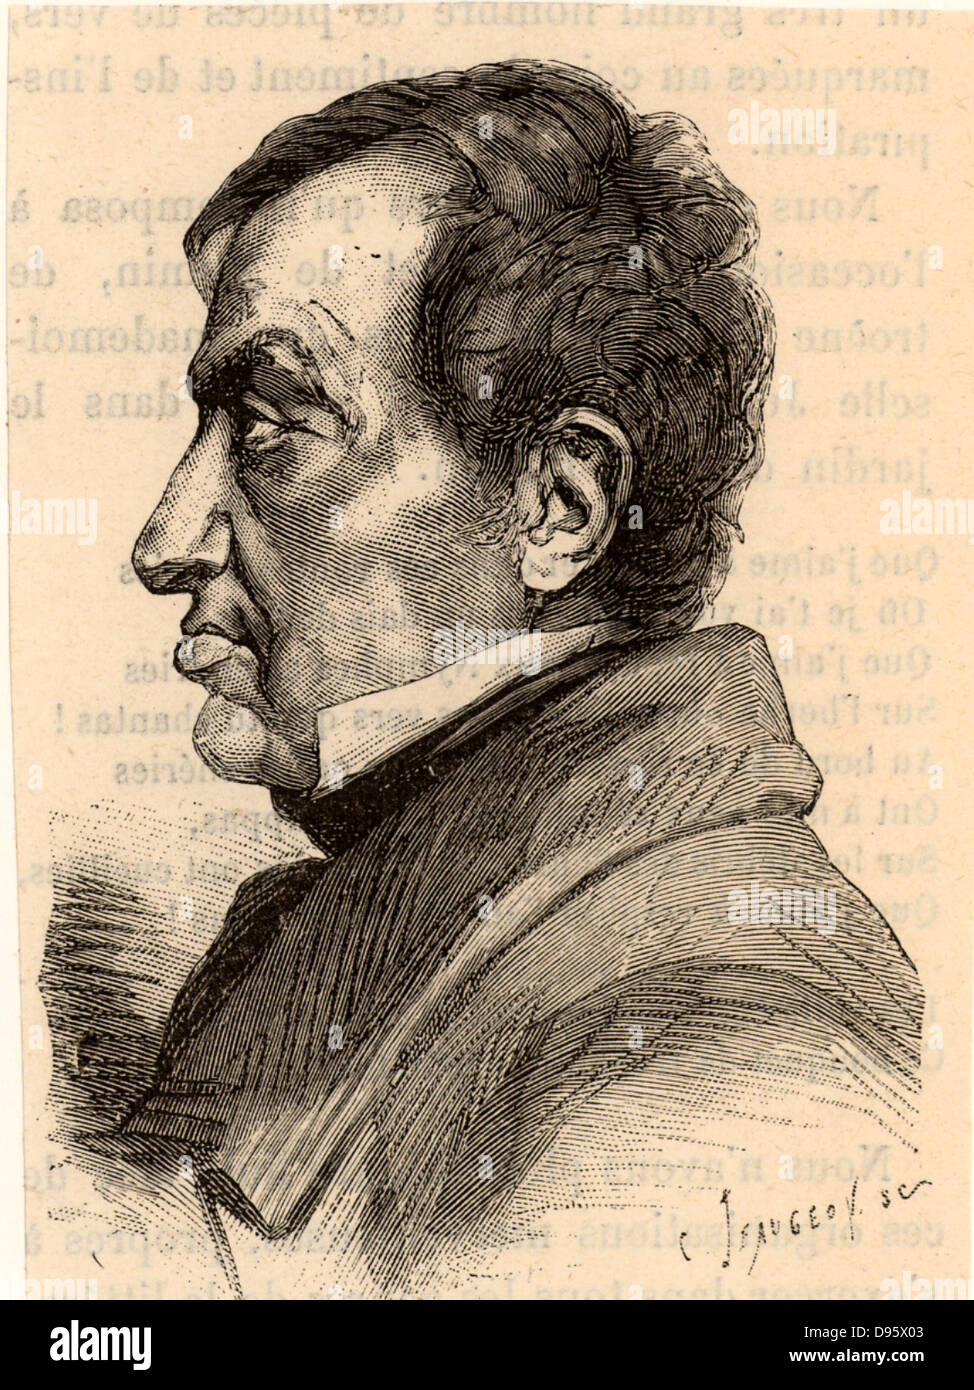 Andre-Marie Ampere (1775-1836) French mathematician and physicist who established the relationship of electricity and magnetism. Engraving from 'Les Nouvelles Conquetes de la Science' by Louis Figuier (Paris, 1883). Stock Photo